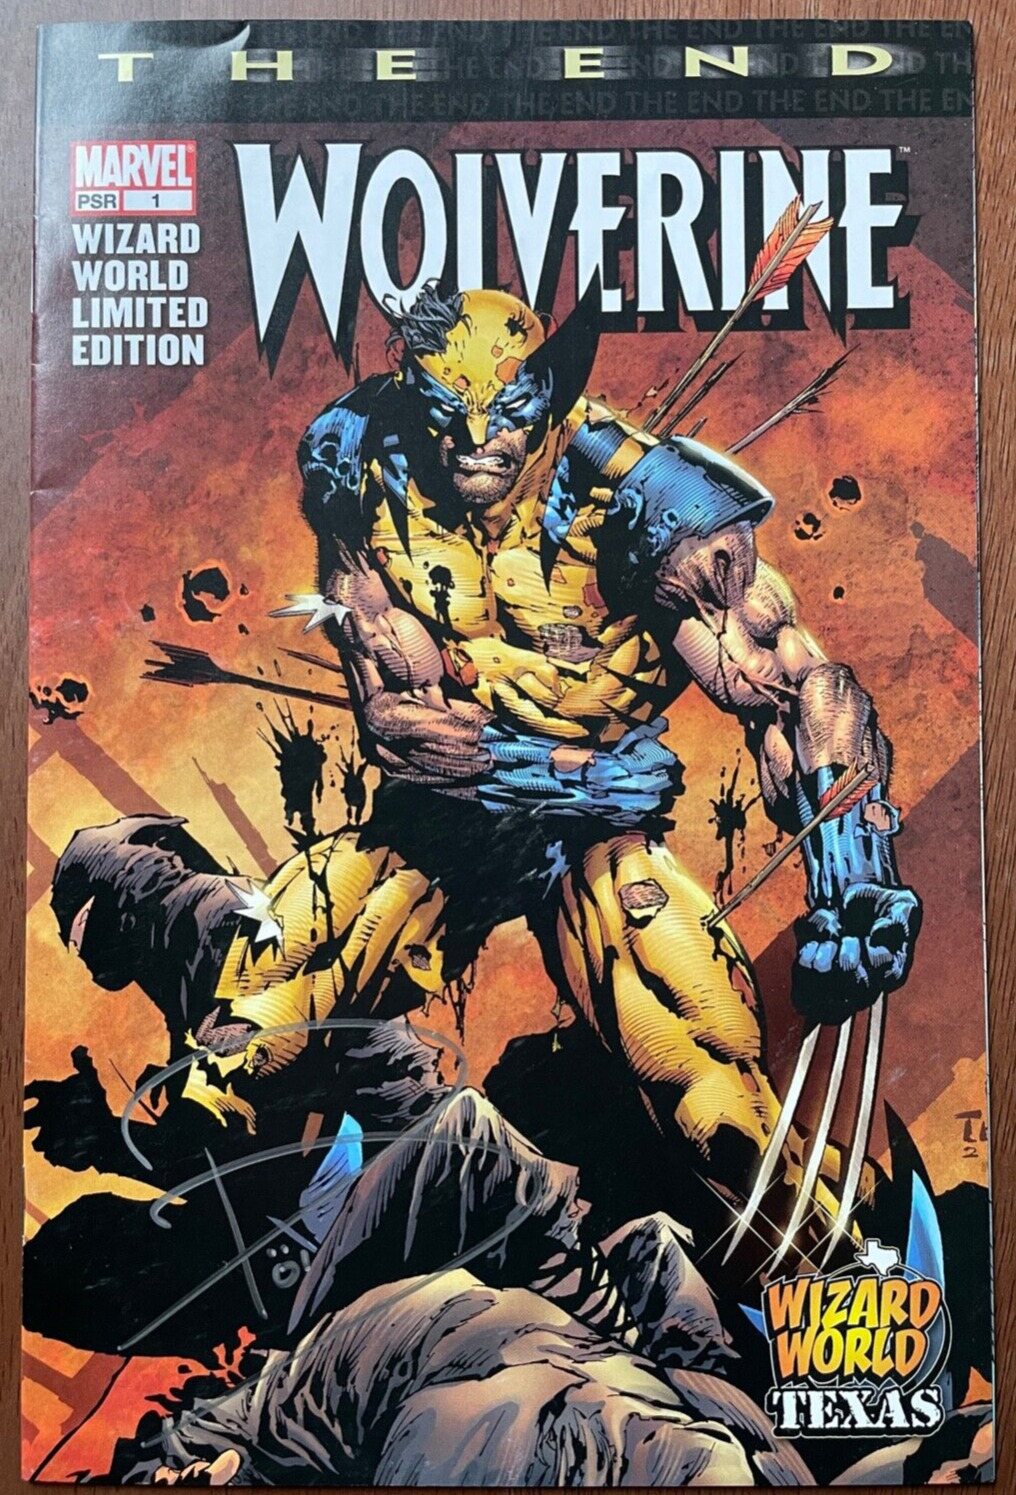 Wolverine The End #1 Wizard World Texas Variant NM Signed by Paul Jenkins 2002